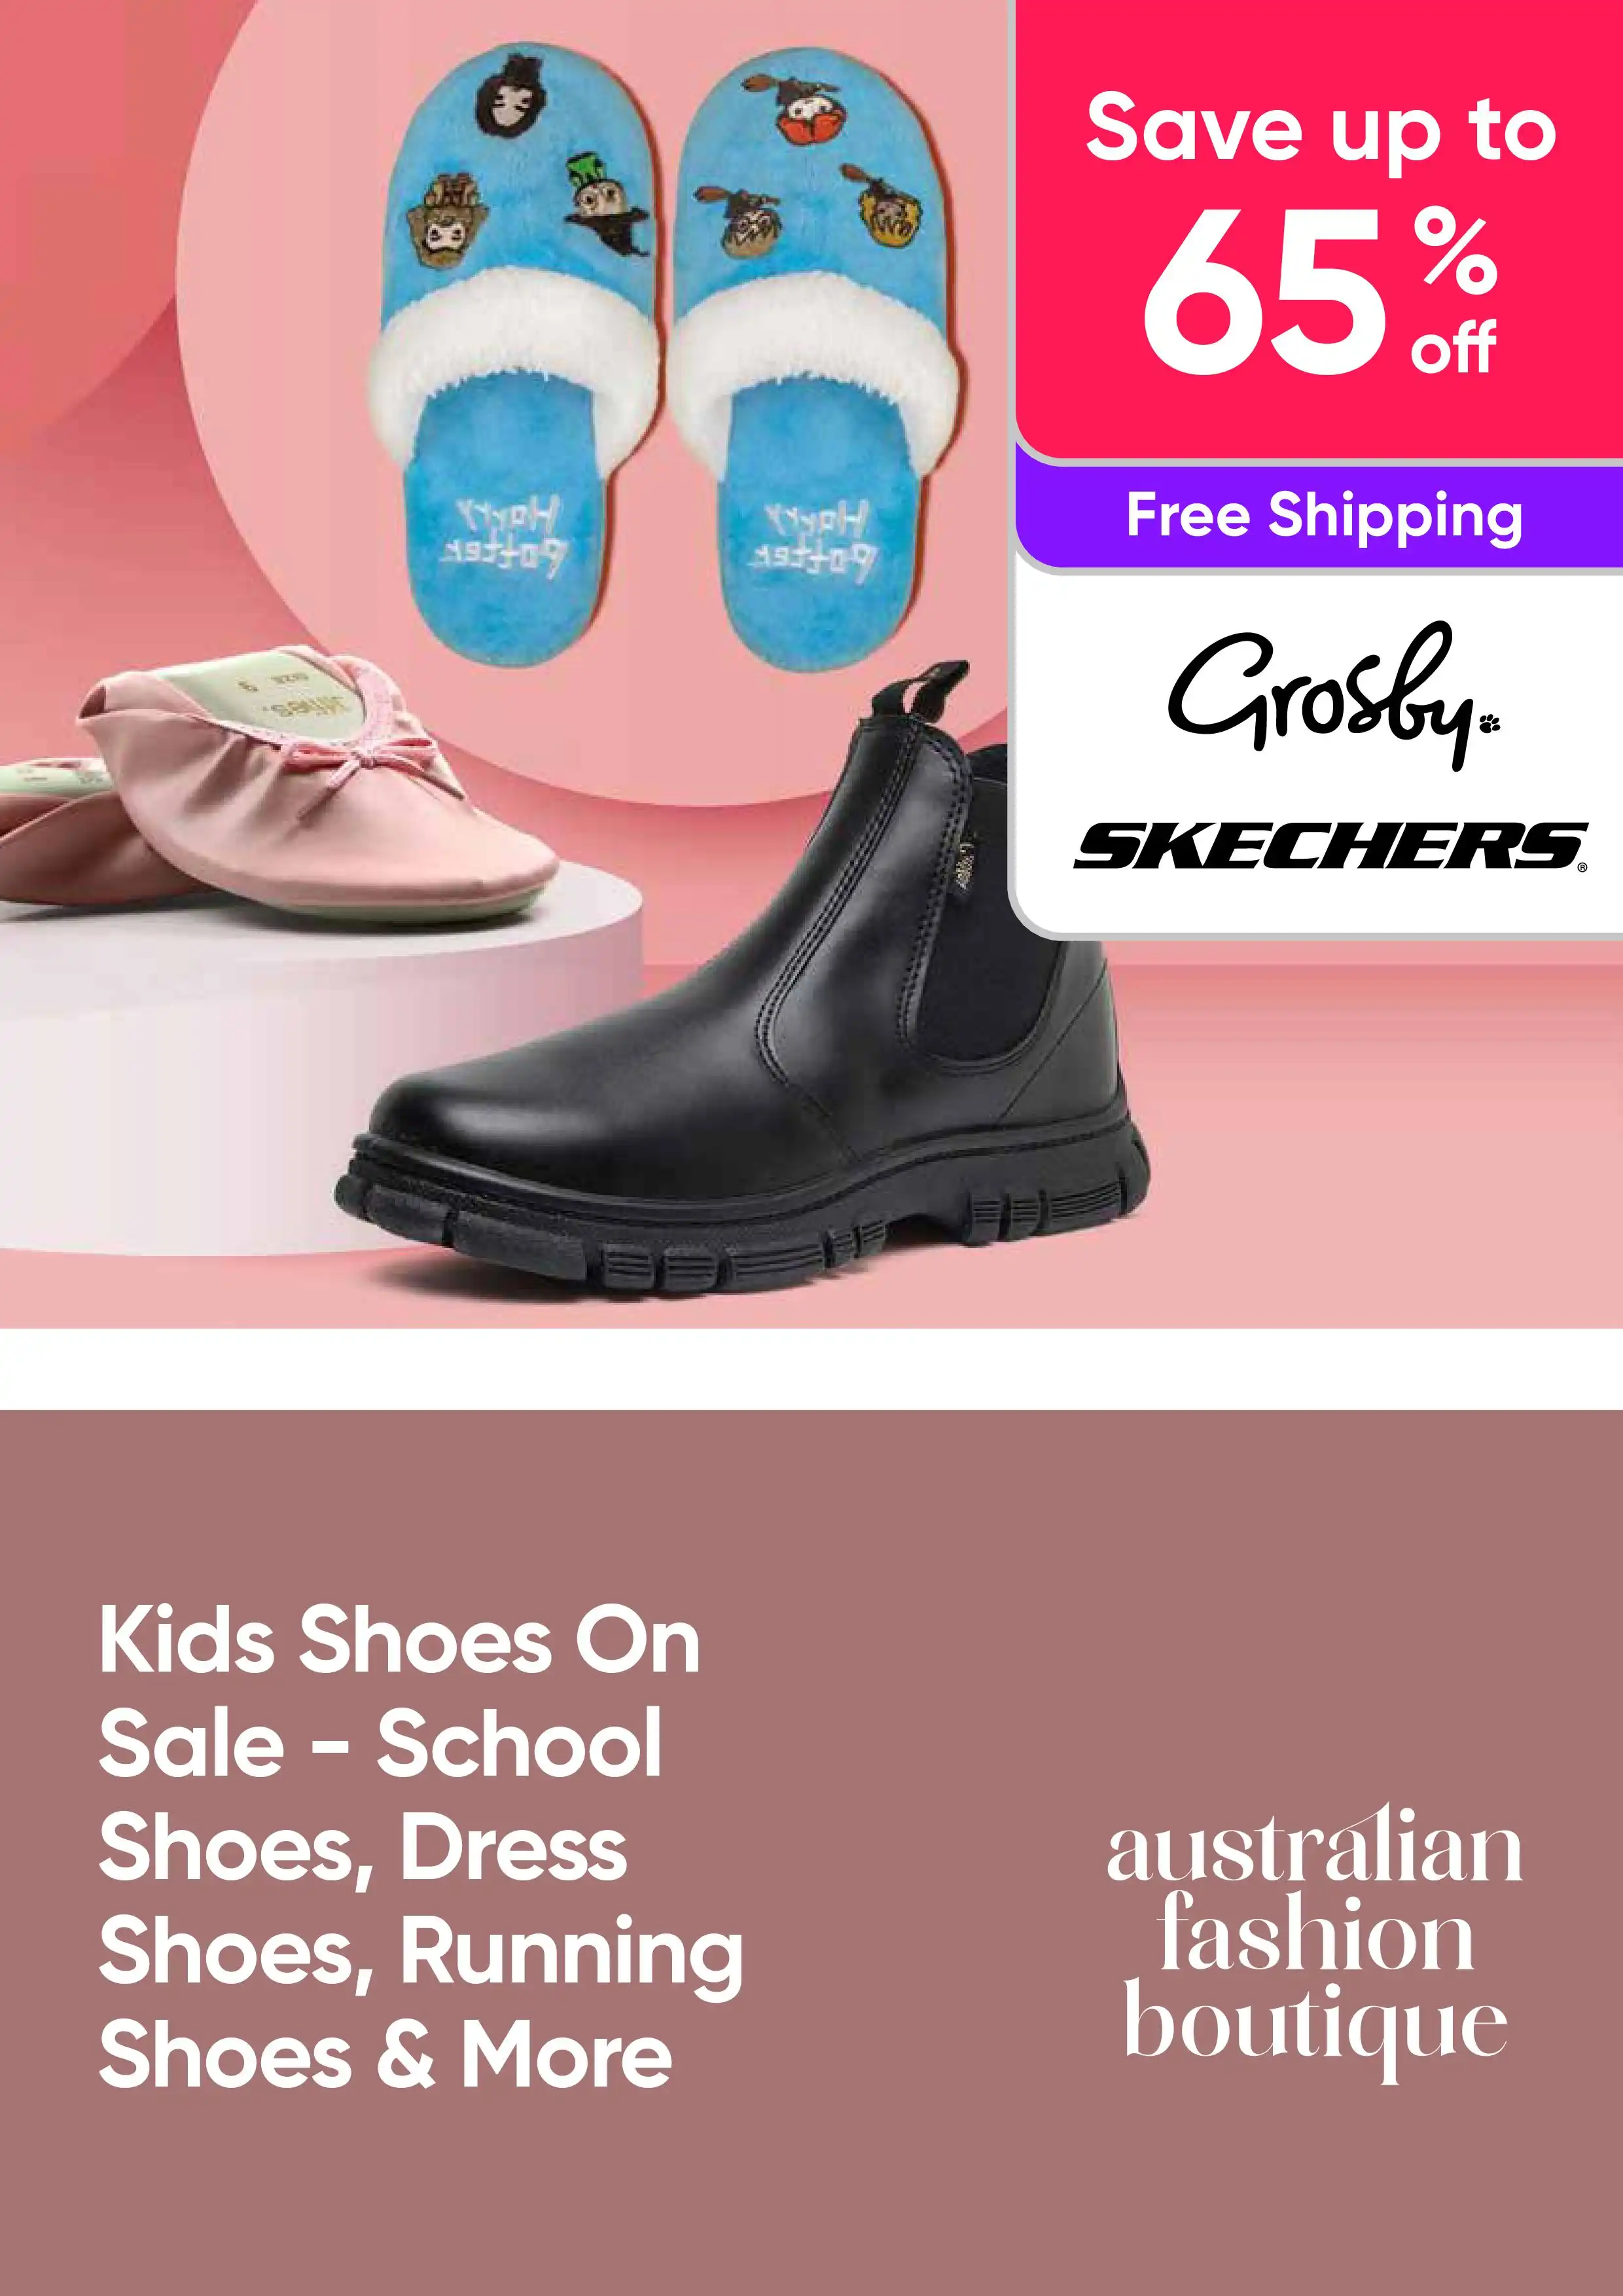 Kids Shoes On Sale - School Shoes, Dress Shoes, Running Shoes By Grosby, Skechers and More